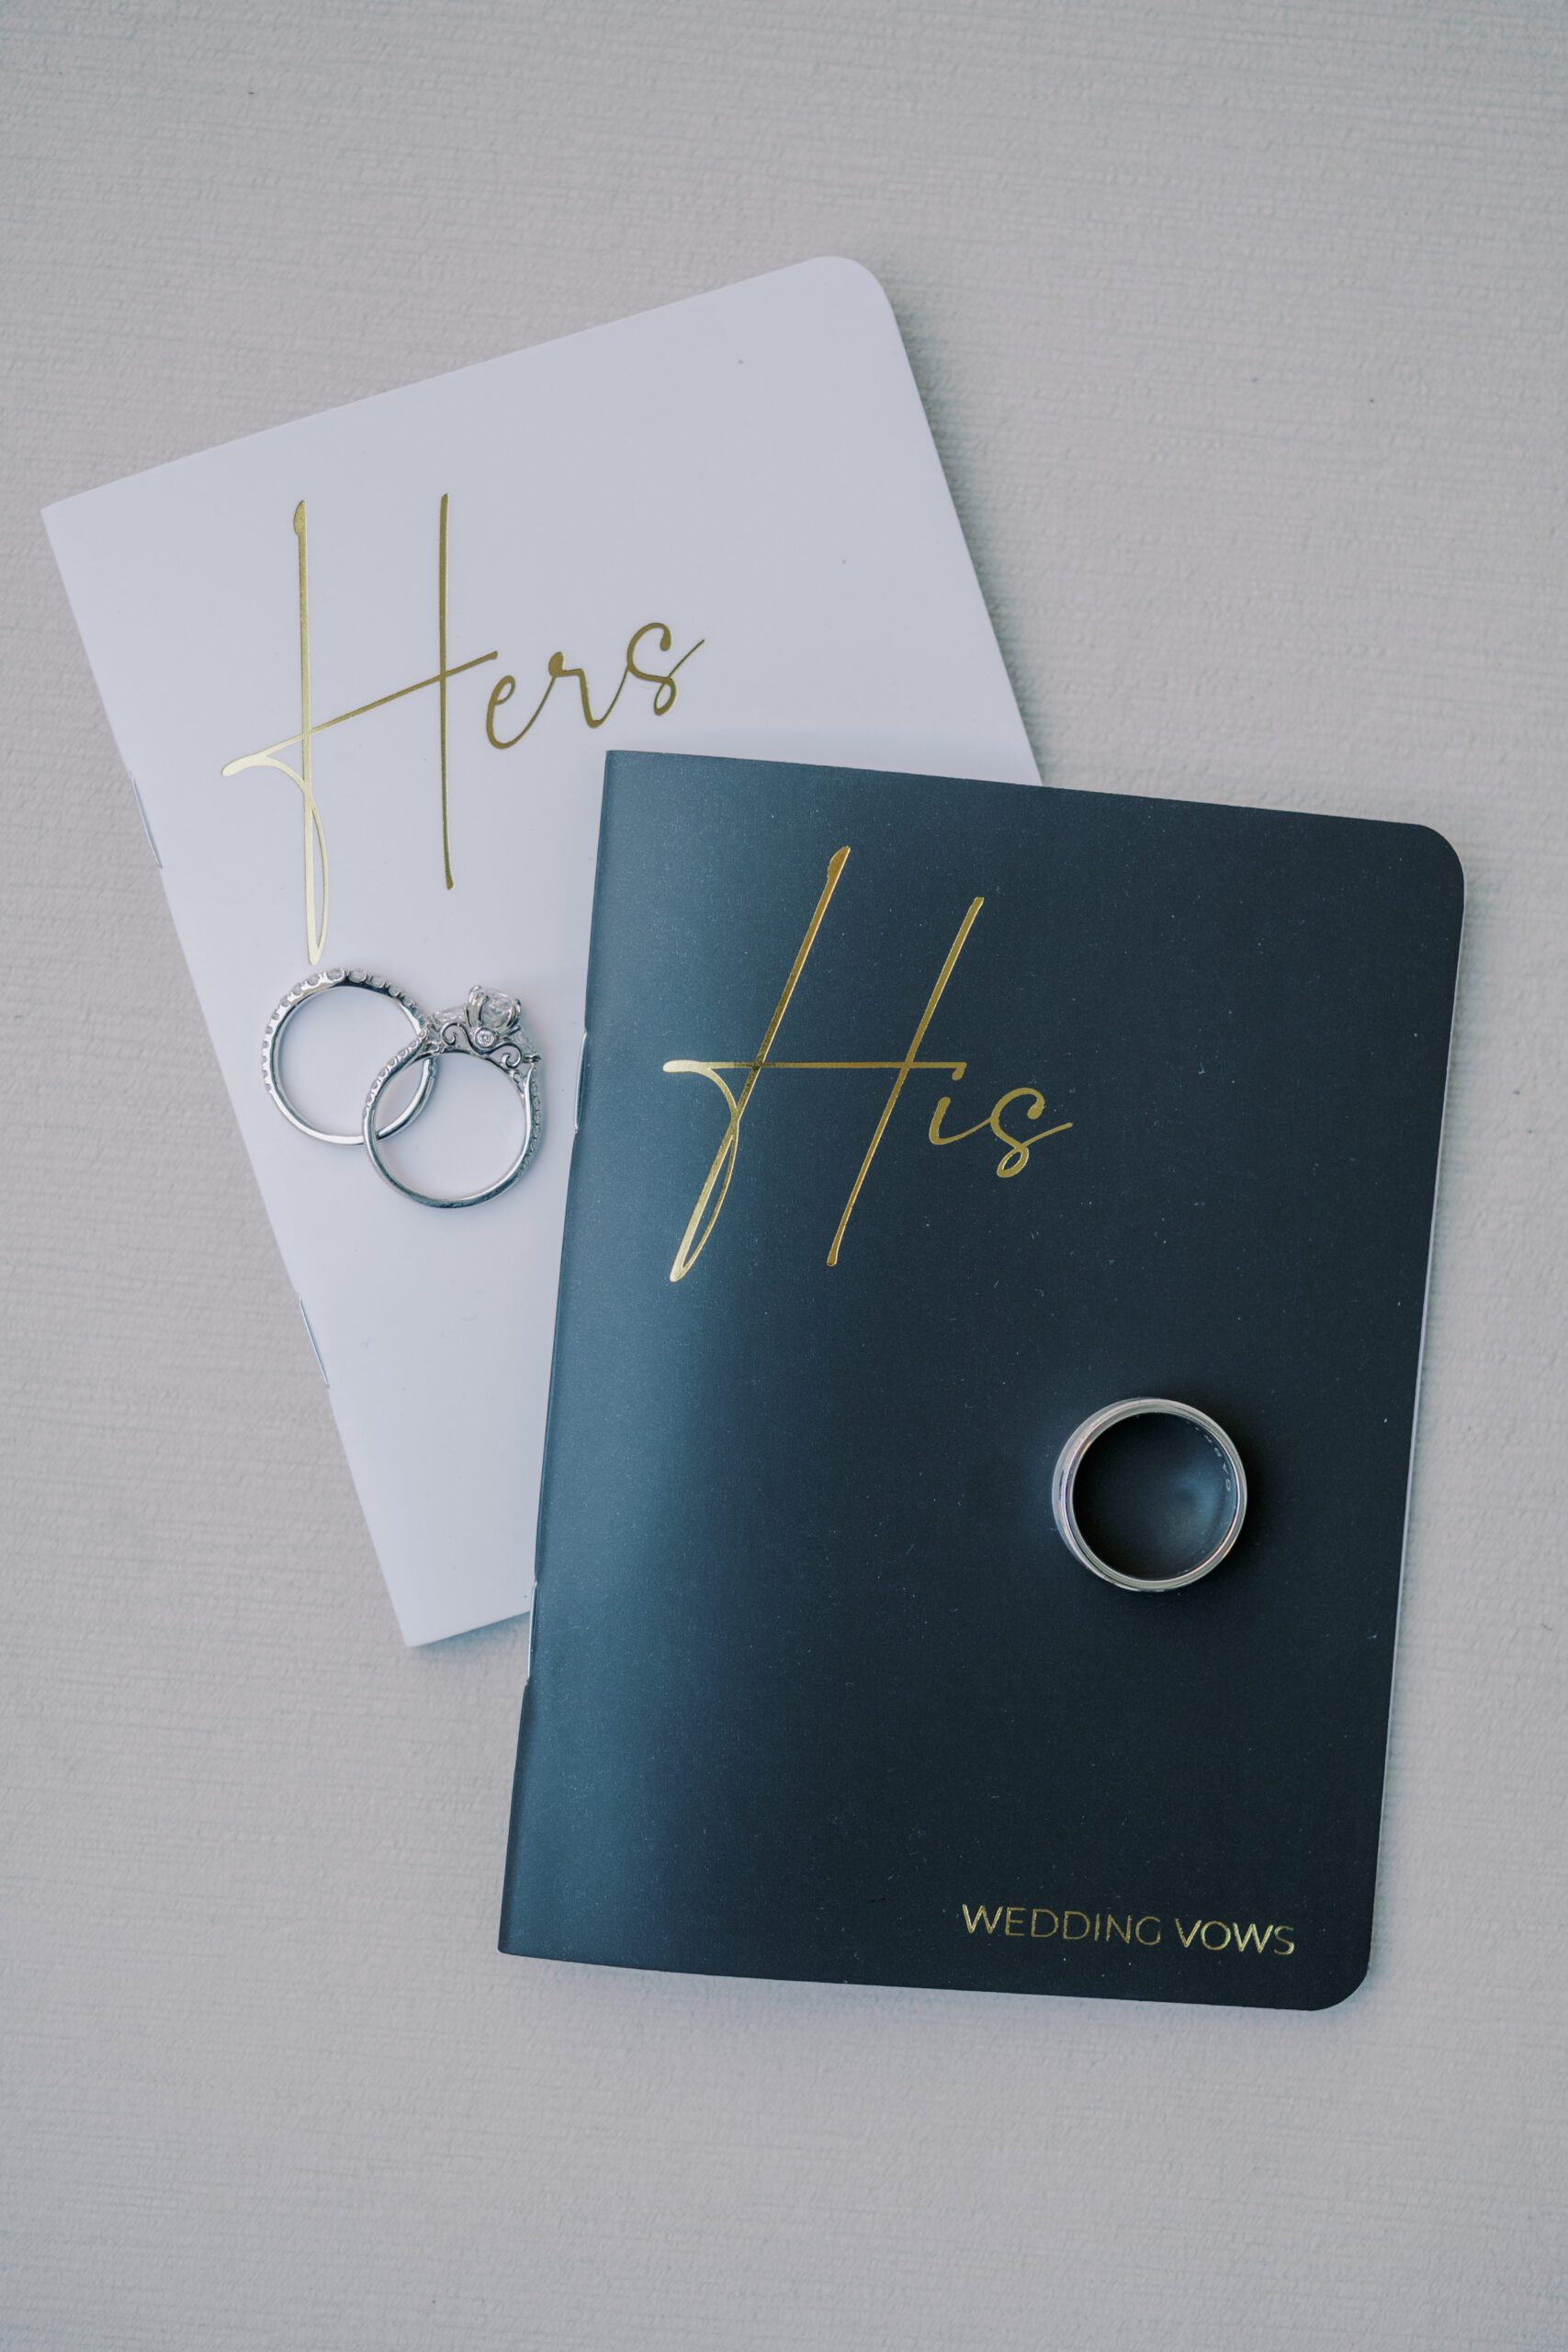 Image of wedding vow notebooks, a black one that says his in gold and a white one that says hers in gold, also pictured are the couple's rings